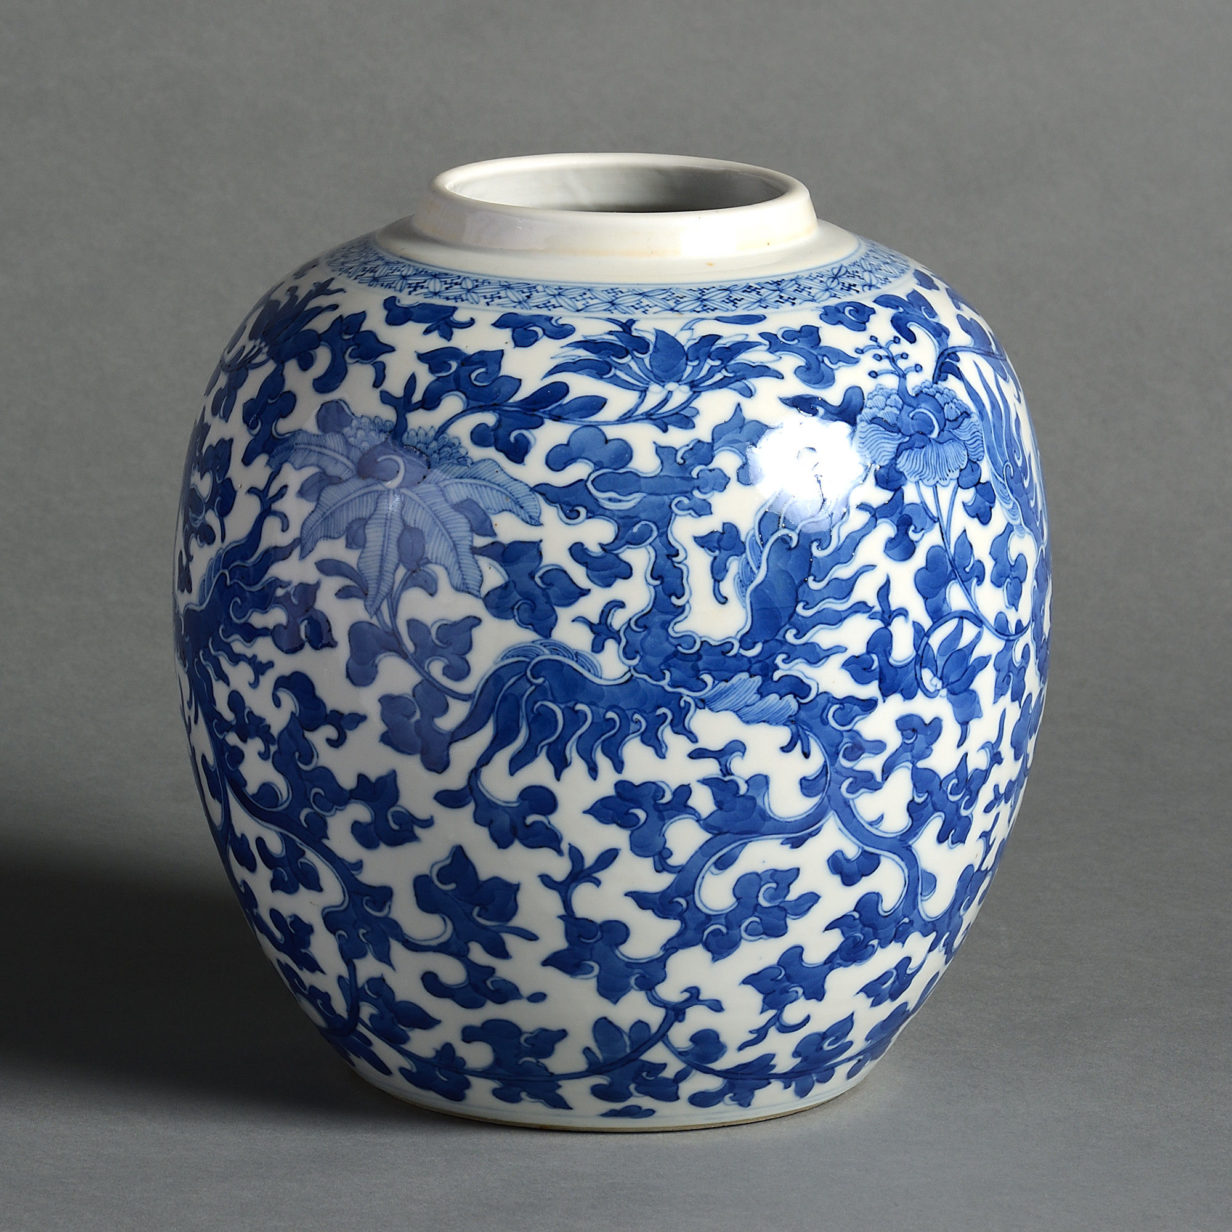 A 19th century qing dynasty blue and white vase